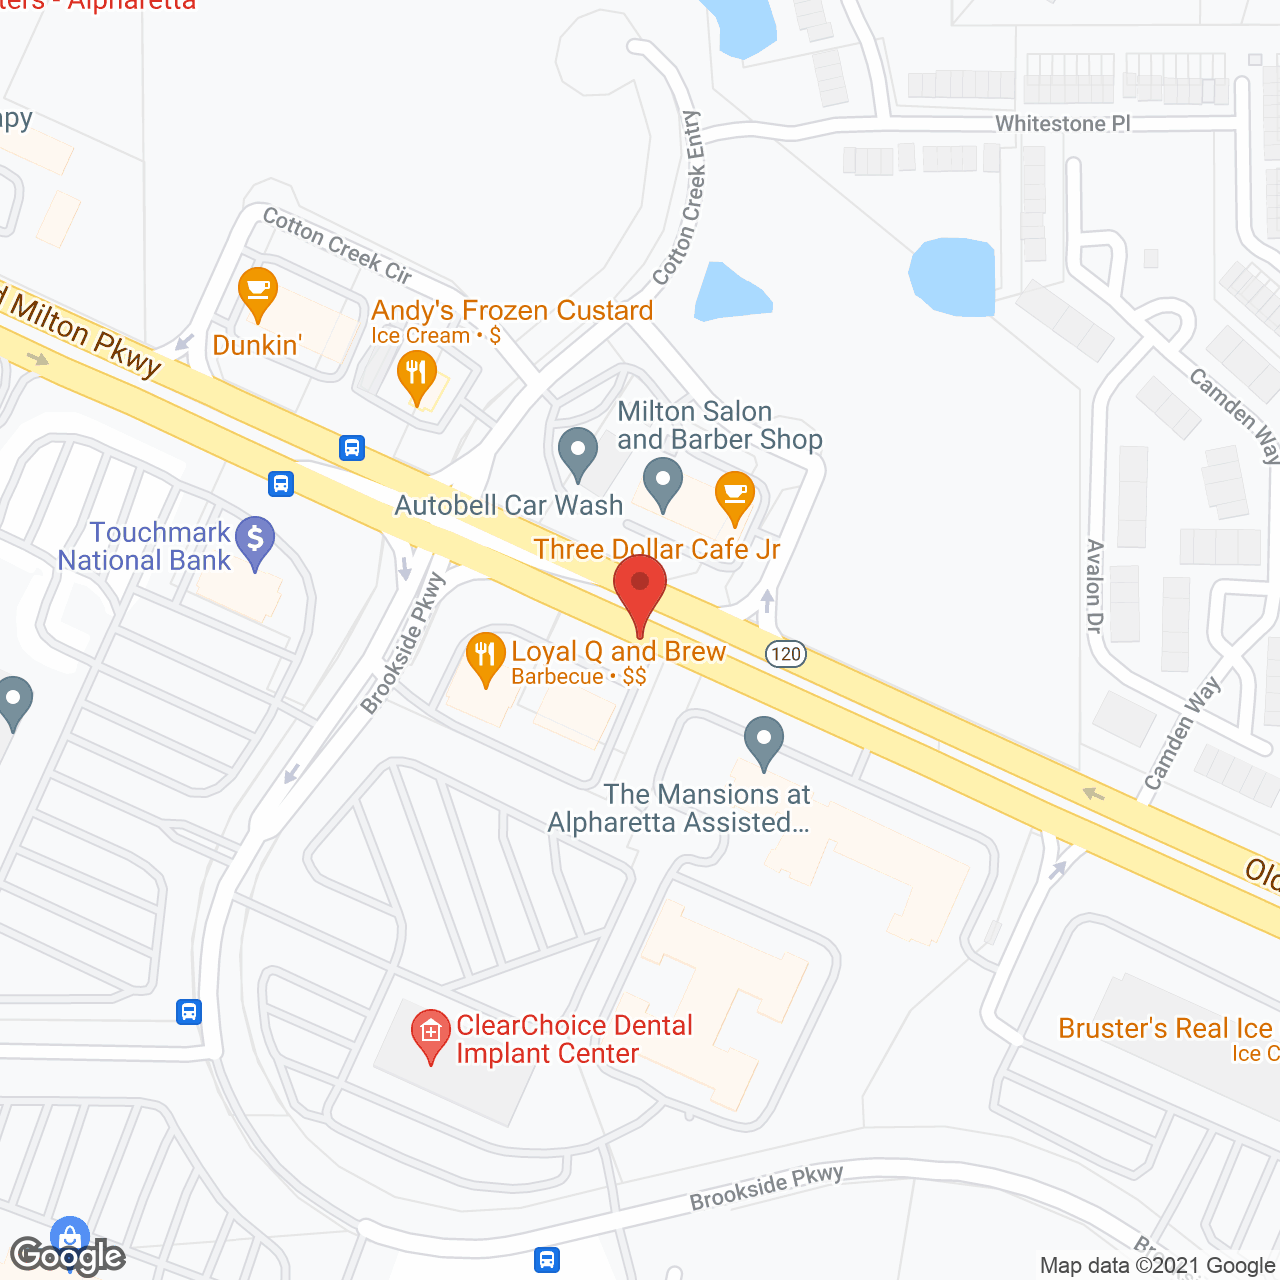 The Mansions of Alpharetta Assisted Living and Memory Support in google map